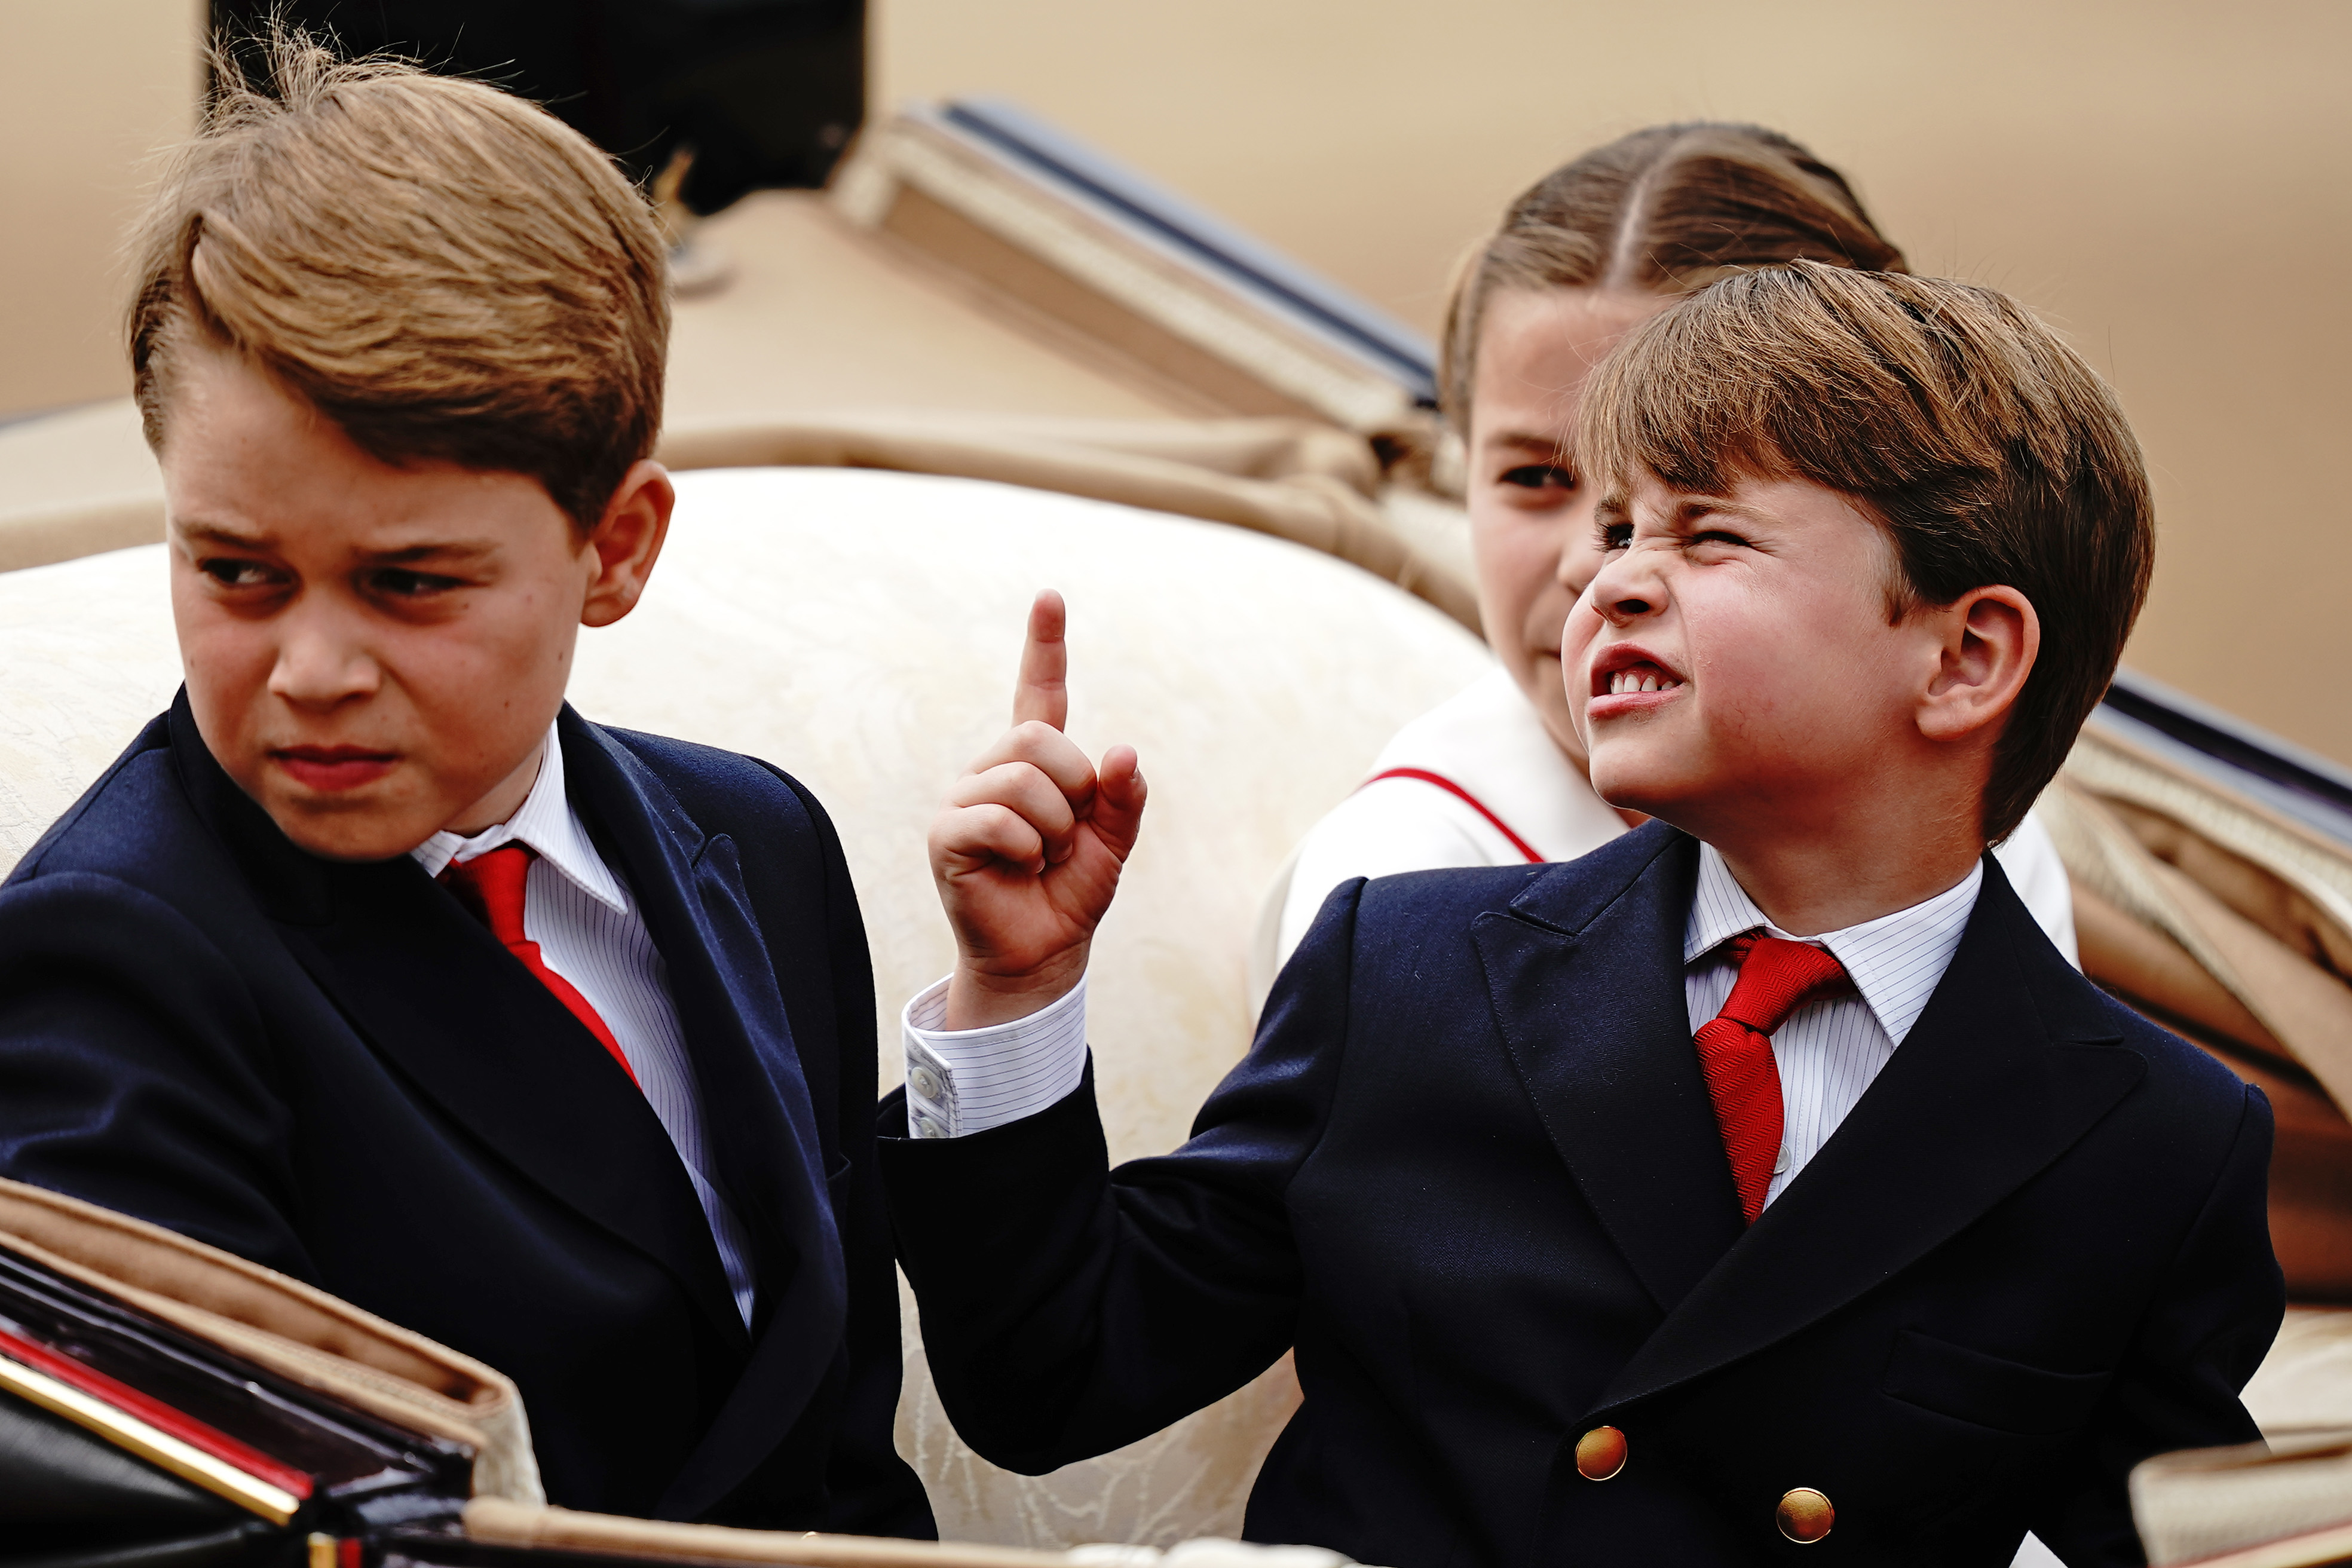 <p>Prince Louis pointed at something while riding in a carriage with siblings Prince George and Princess Charlotte during <a href="https://www.wonderwall.com/celebrity/royals/trooping-the-colour-2023-king-charles-iii-celebrates-the-first-of-his-reign-752078.gallery">Trooping the Colour</a> in London on June 17, 2023.</p>